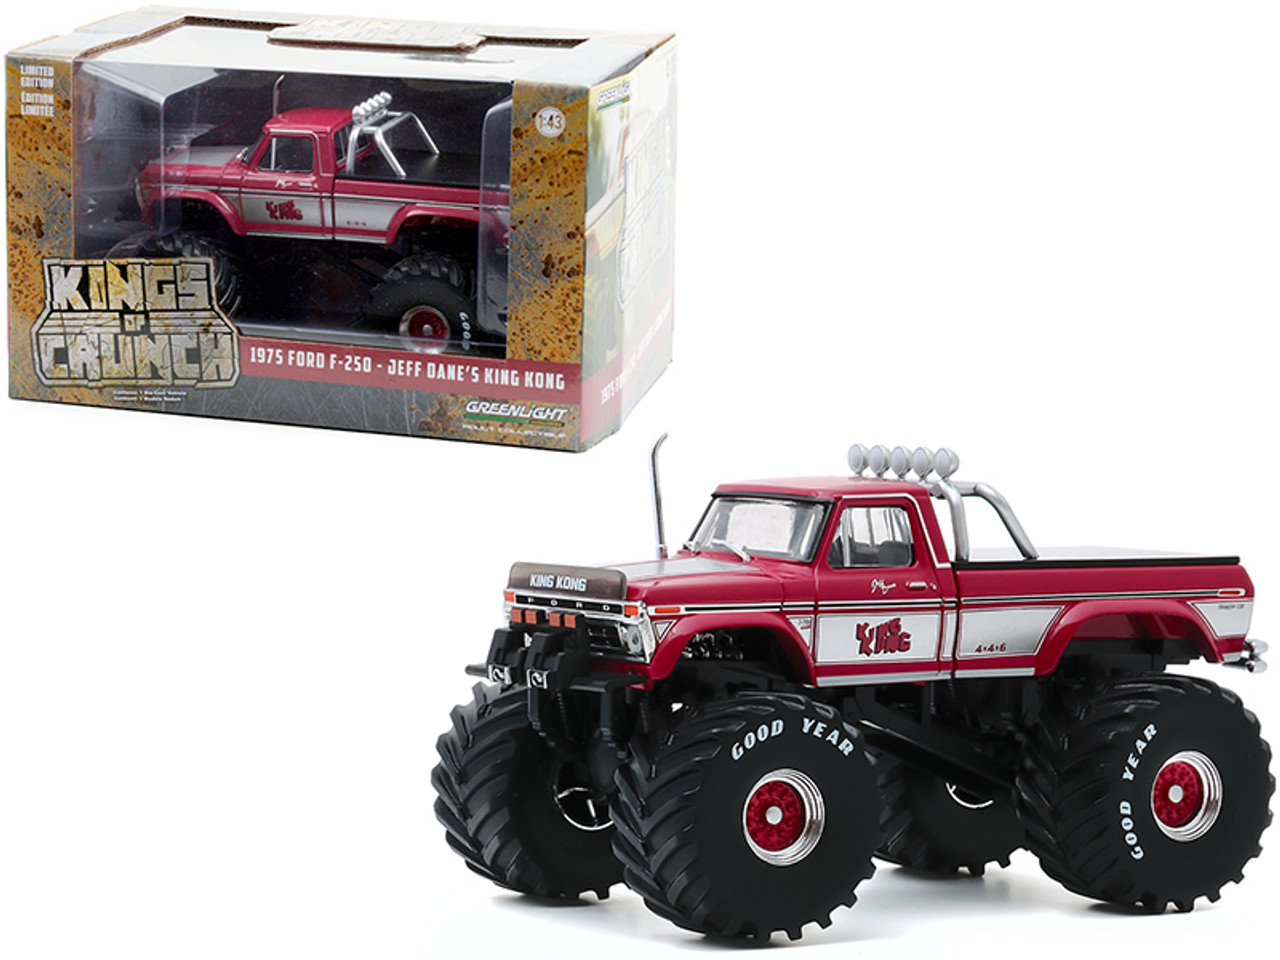 1975 Ford F-250 Ranger XLT Monster Truck with 66-Inch Tires and Bed Cover "King Kong" Pink "Kings of Crunch" 1/43 Diecast Model Car by Greenlight